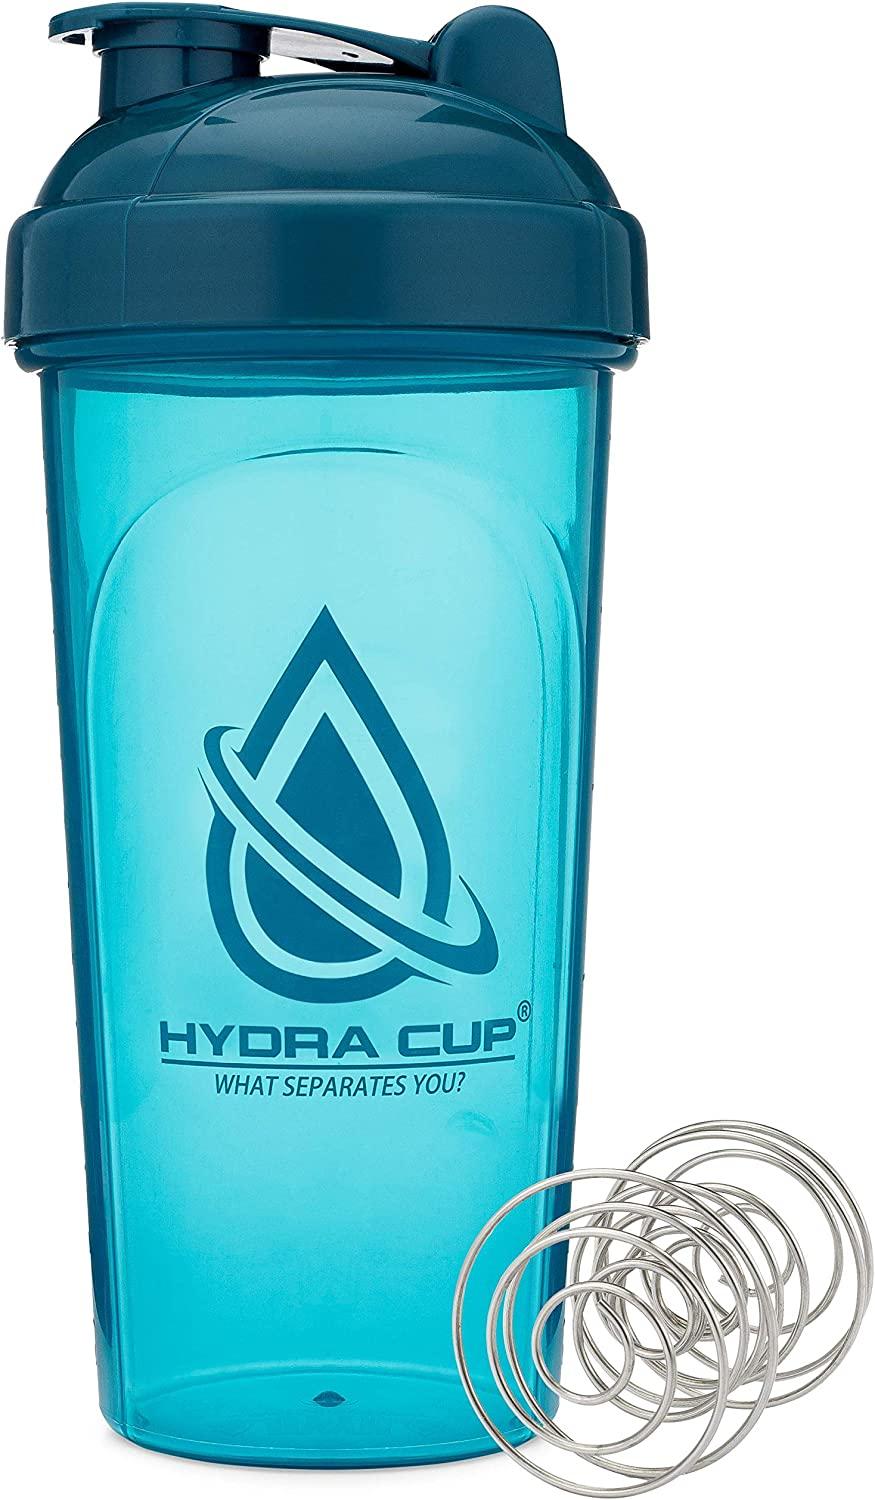  Hydra Cup [4 Pack] - Protein Powder Funnel & Three